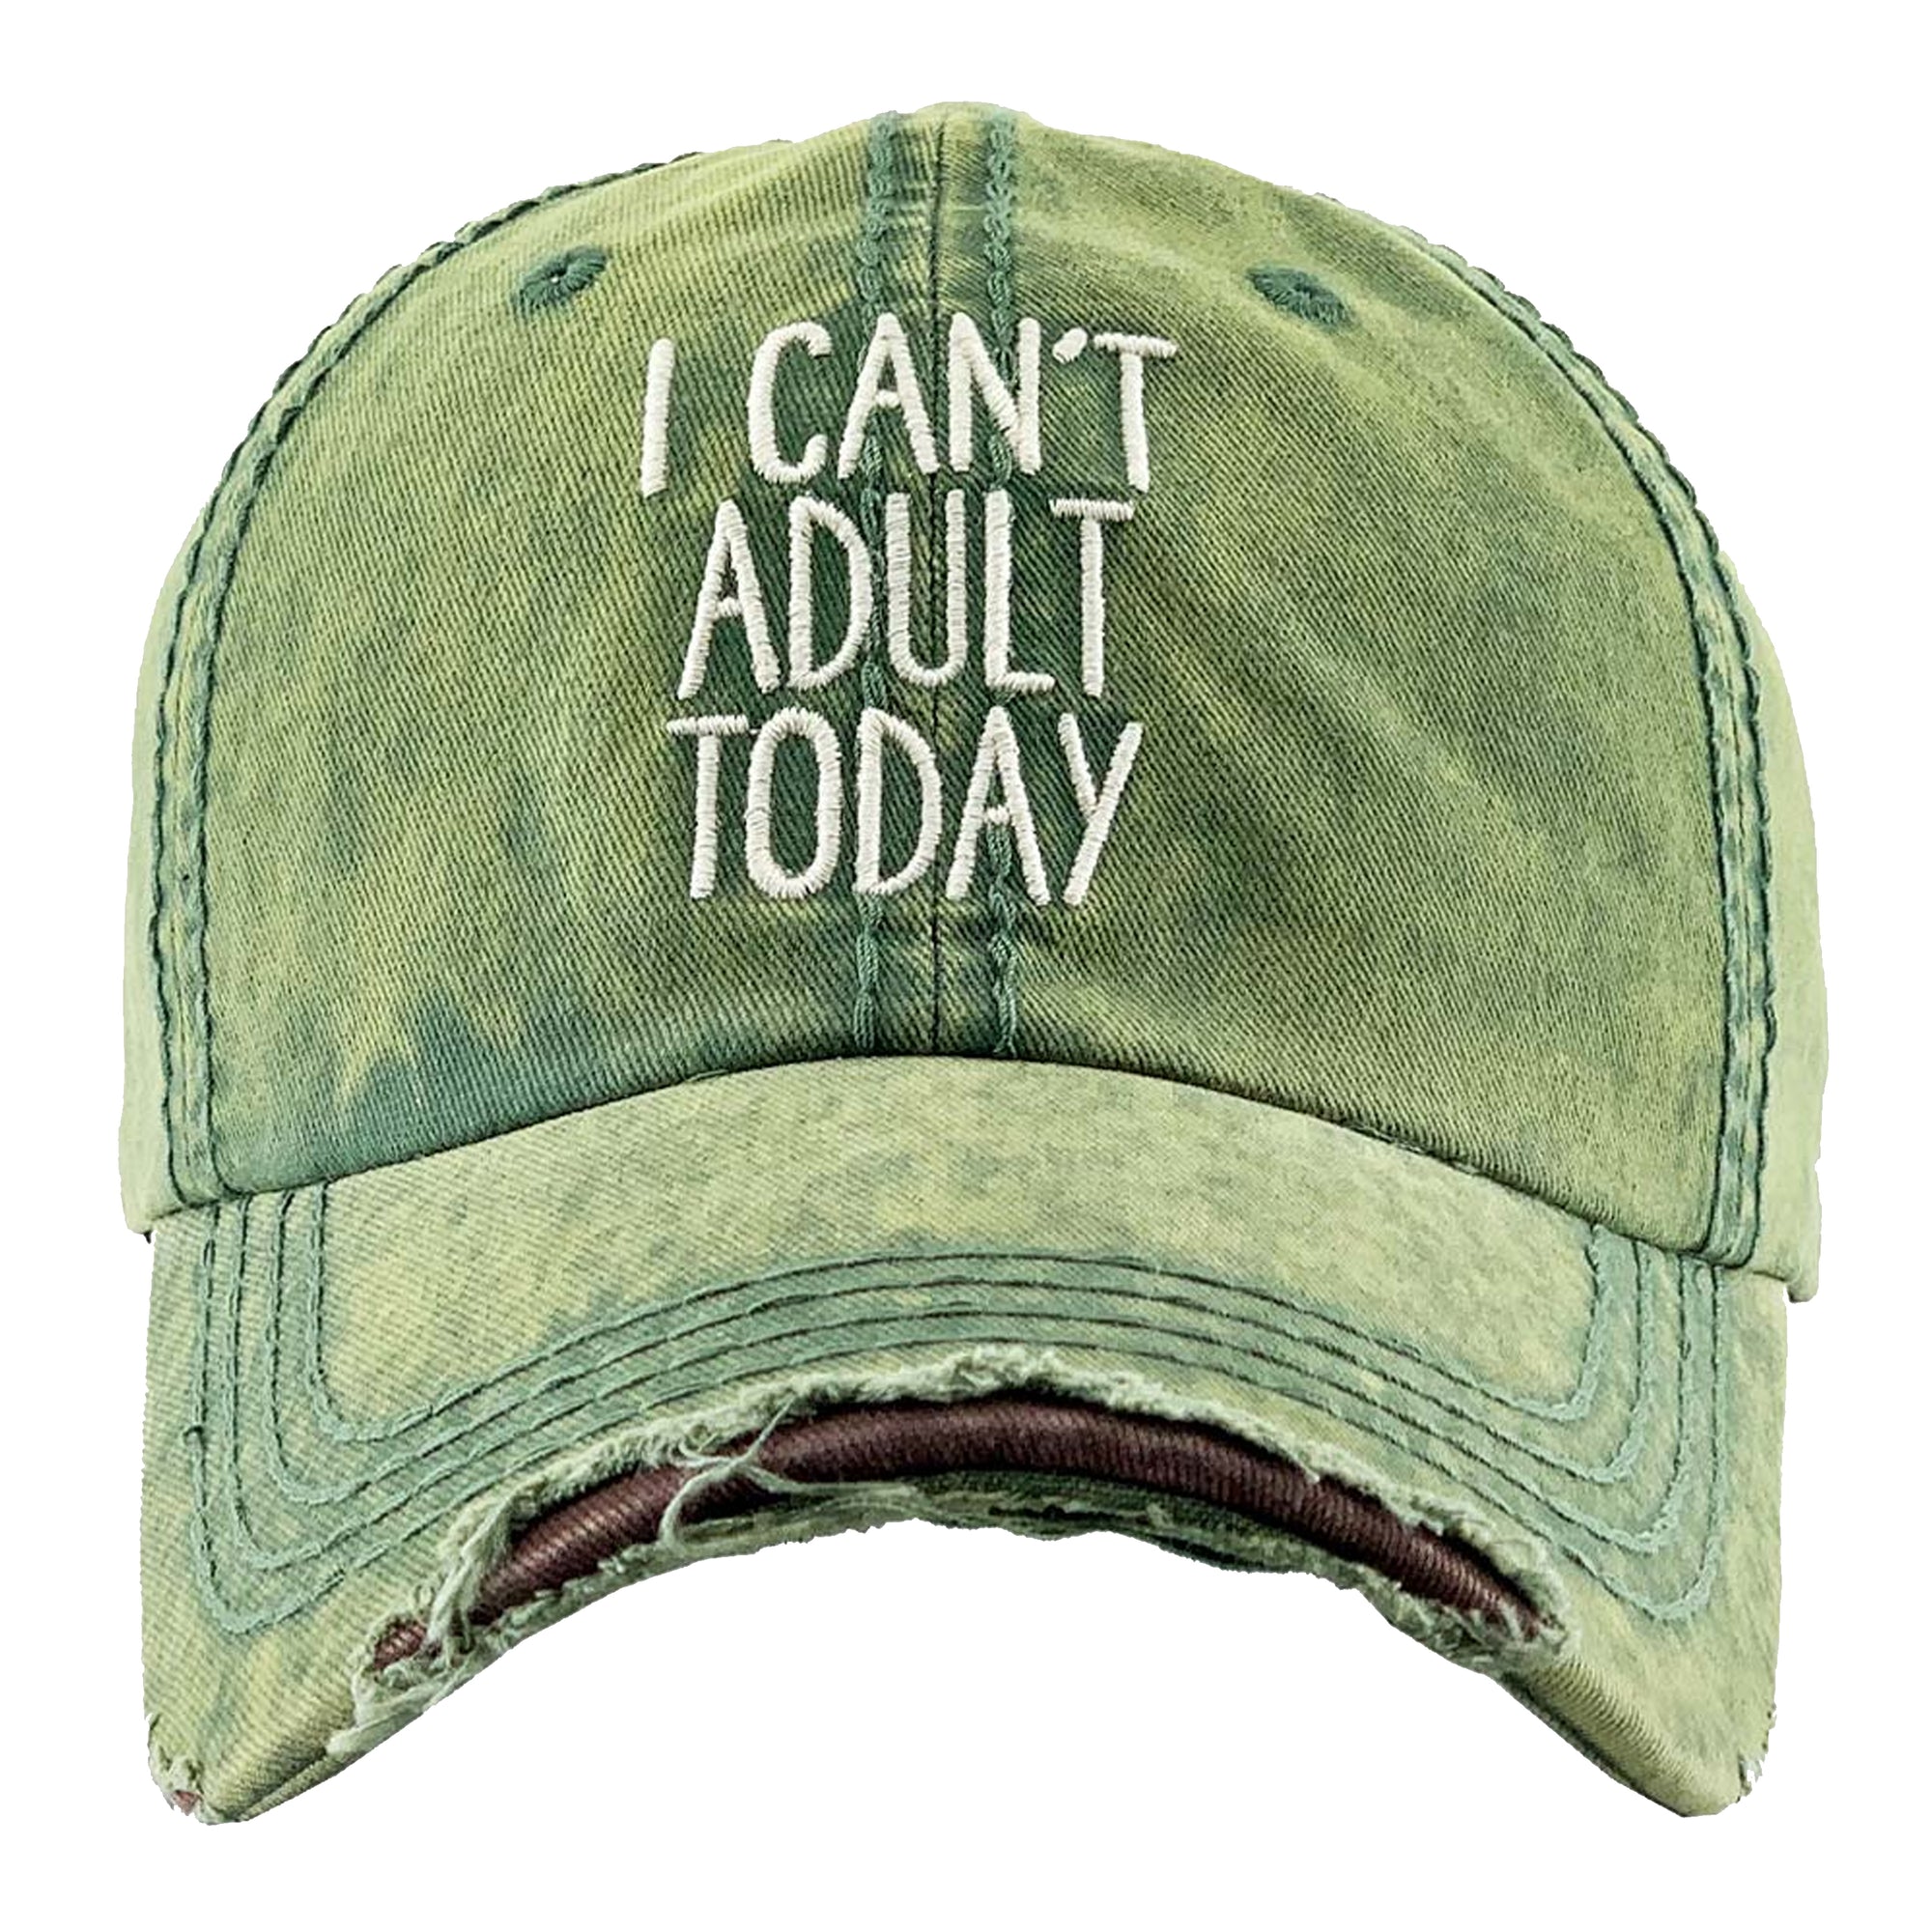 I Can't Adult Today Vintage Baseball Cap adulting, i cant adult today, lazy by Expression Tees